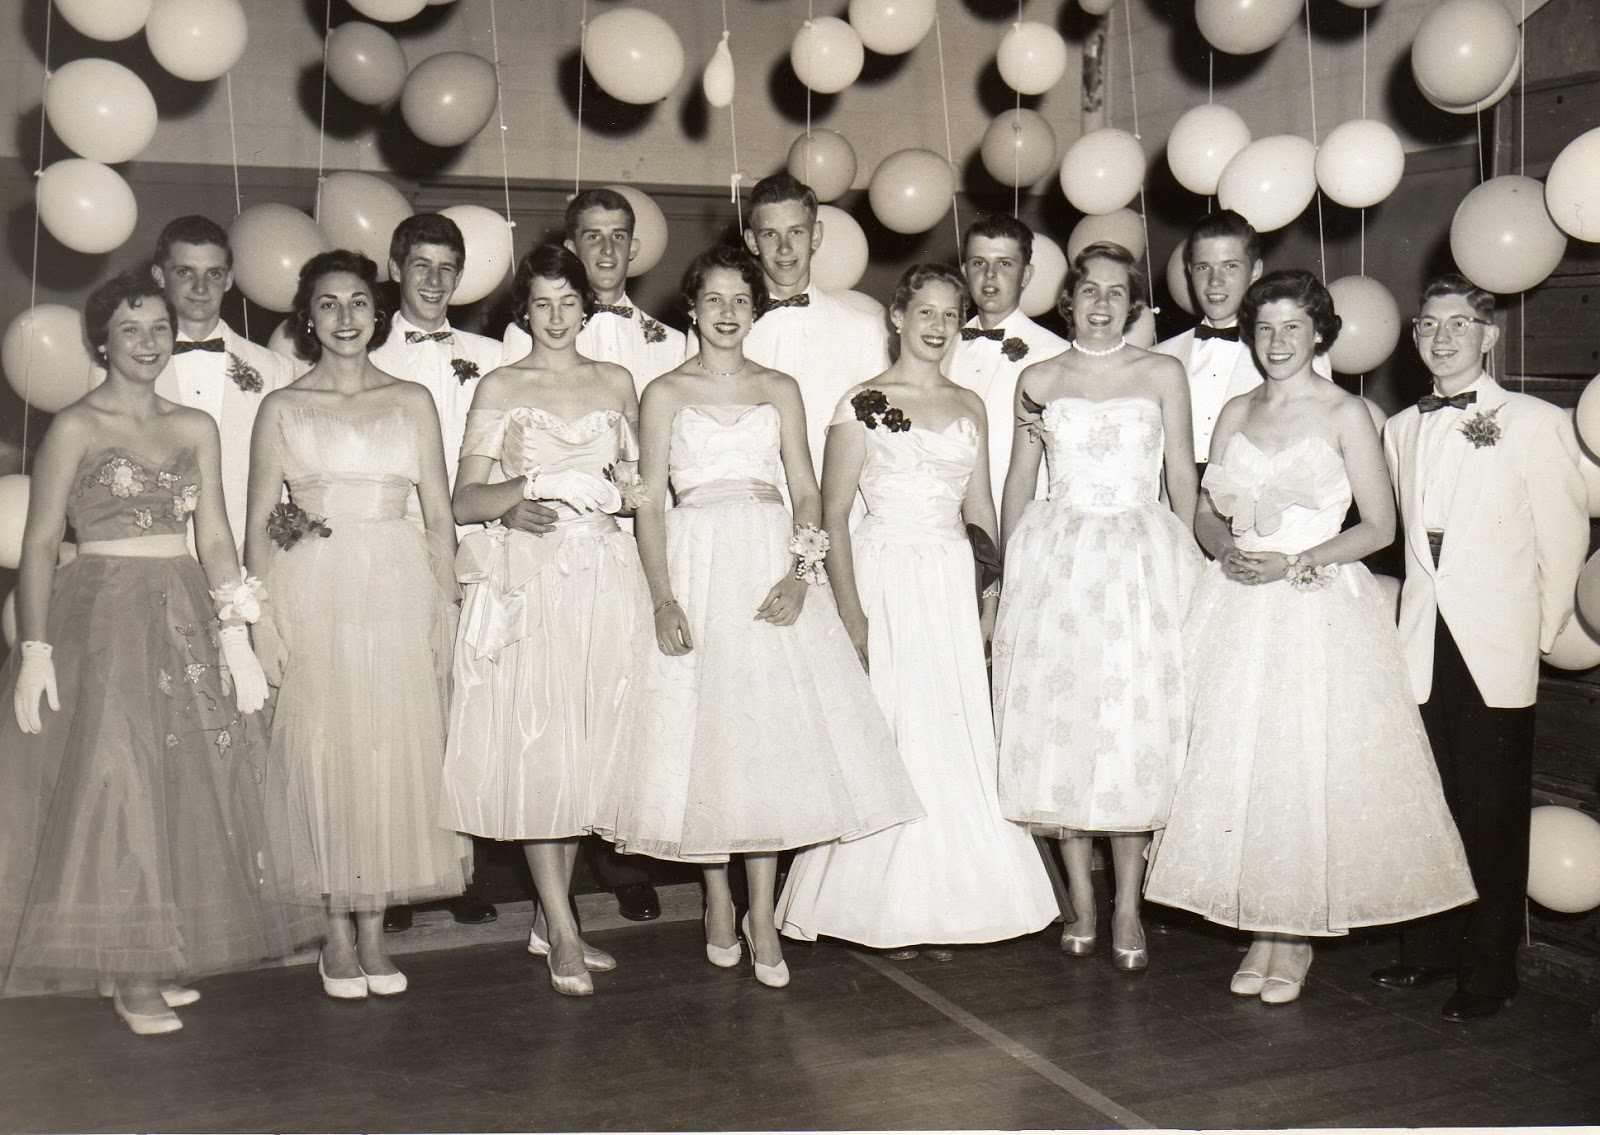 Vintage High School Proms from the 1940s and 1950s